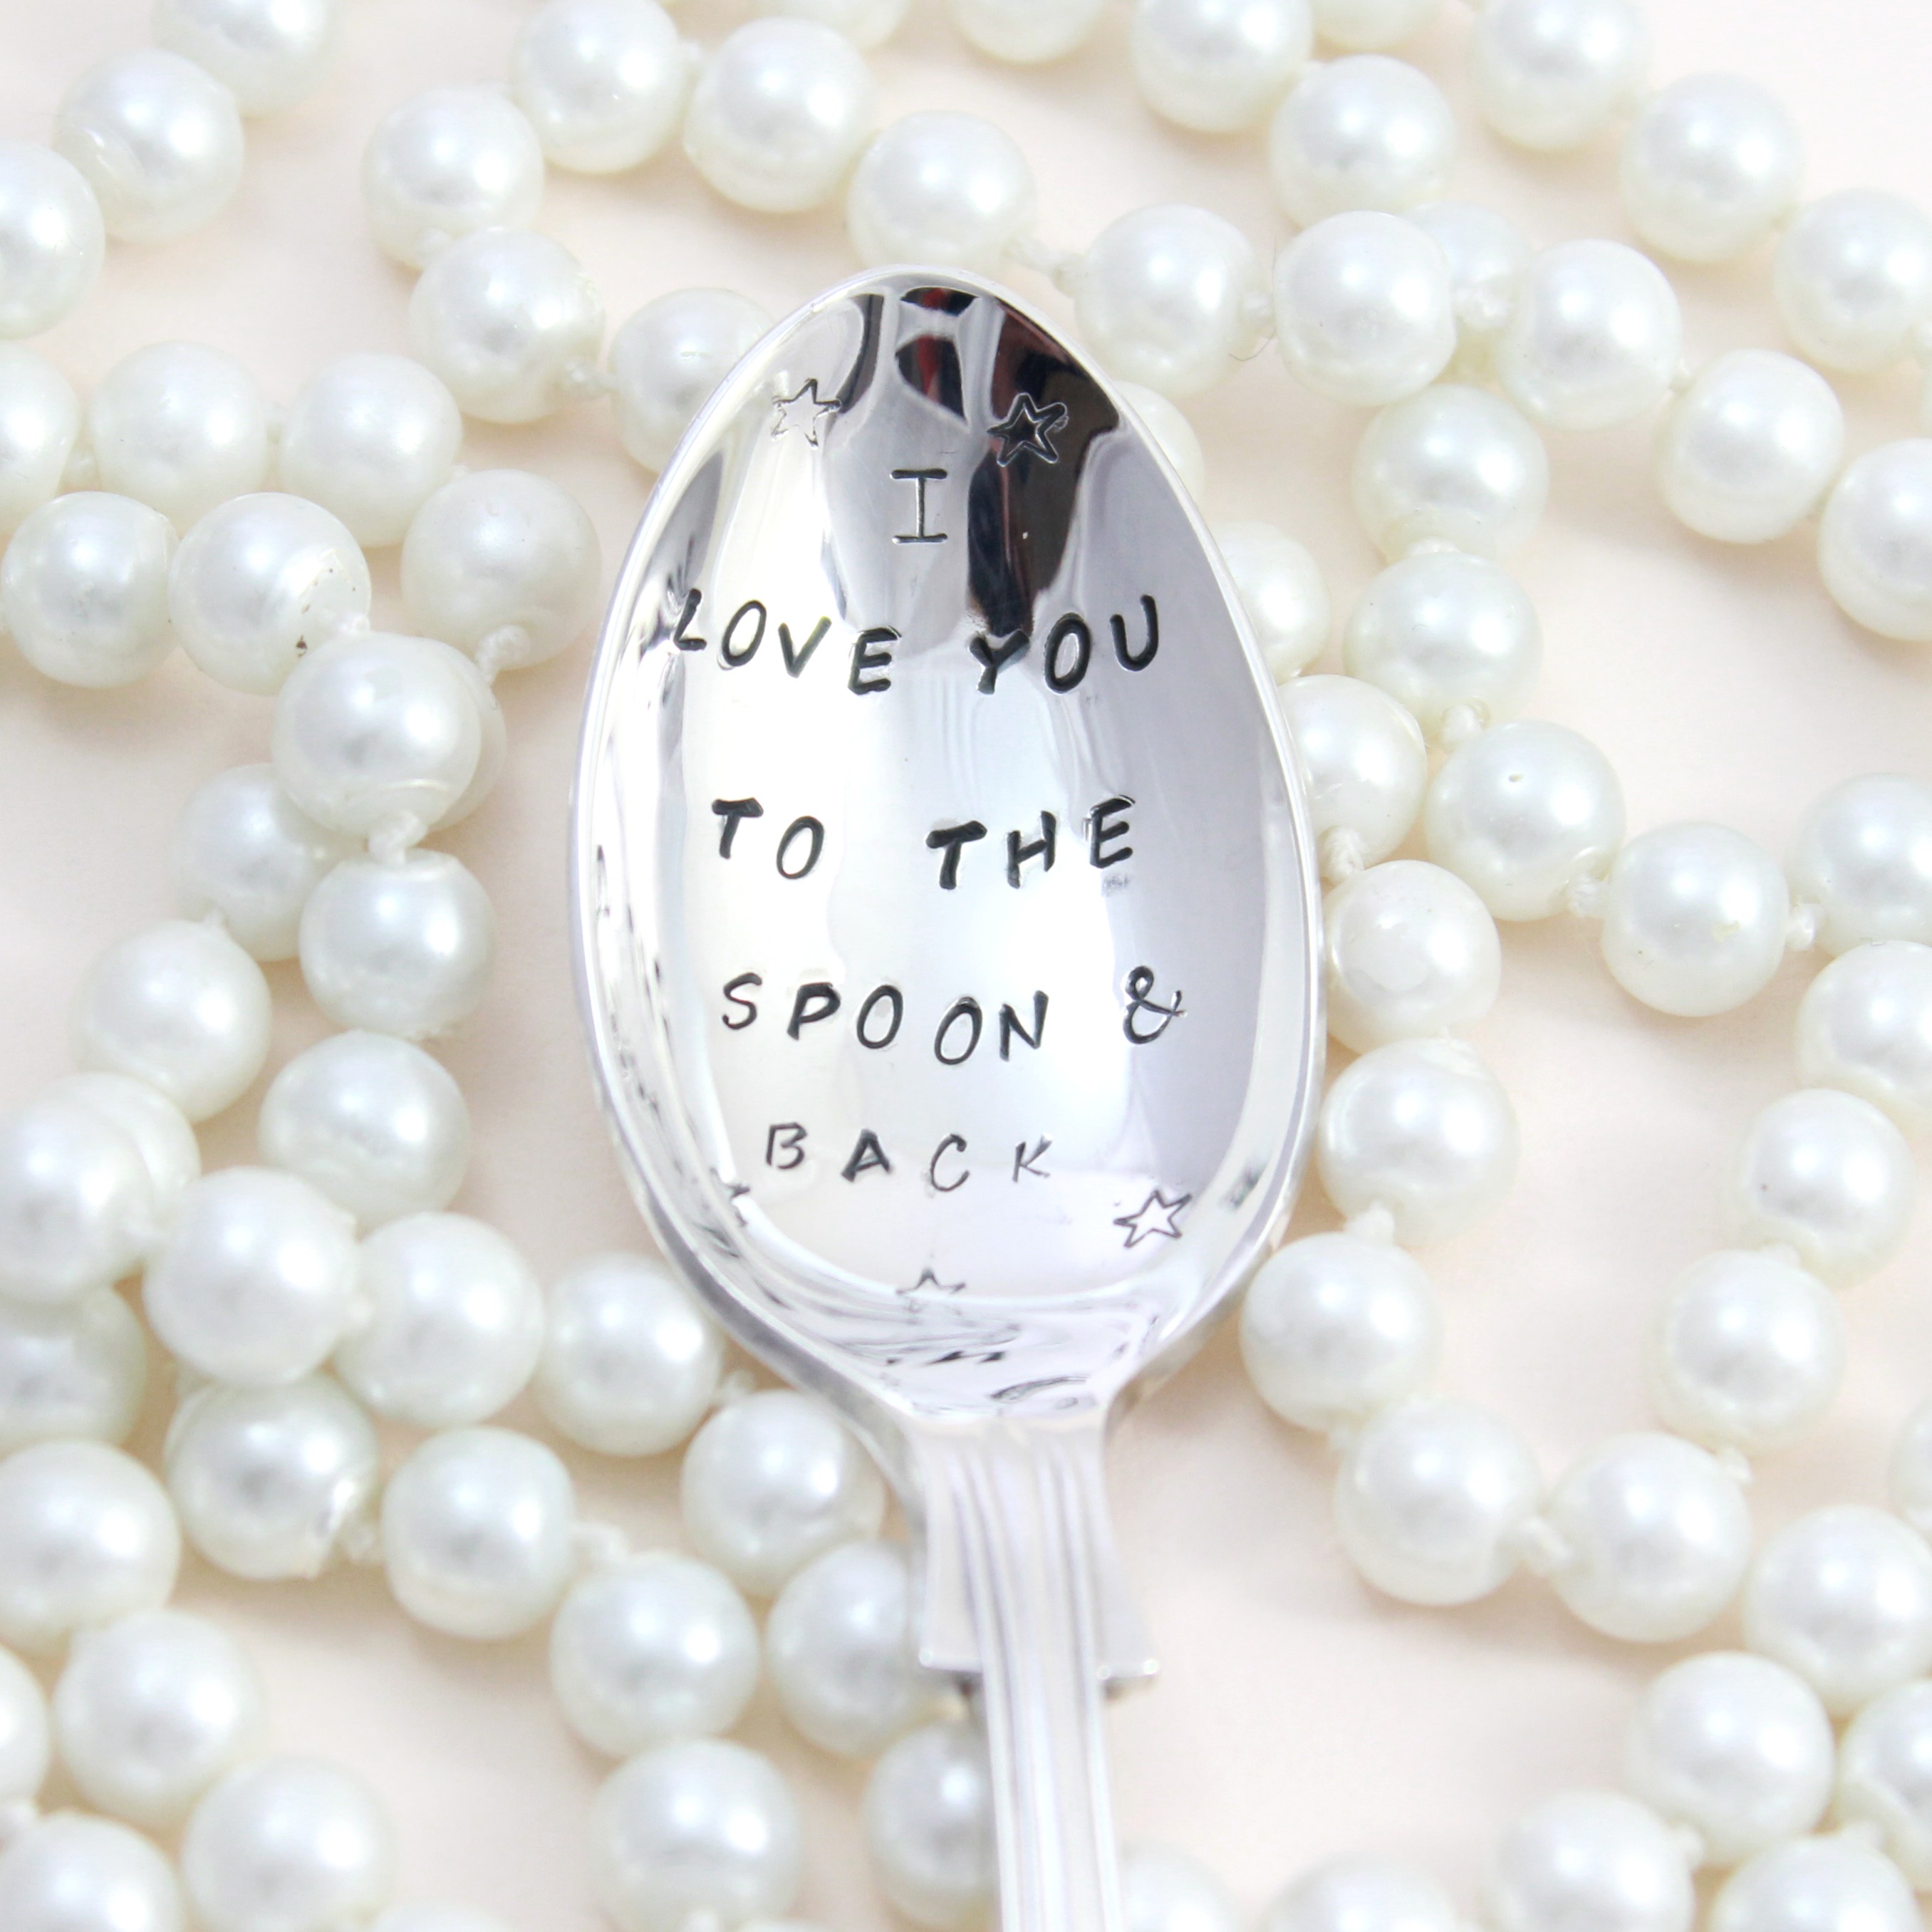 Personalised spoons make the most perfect gifts! 